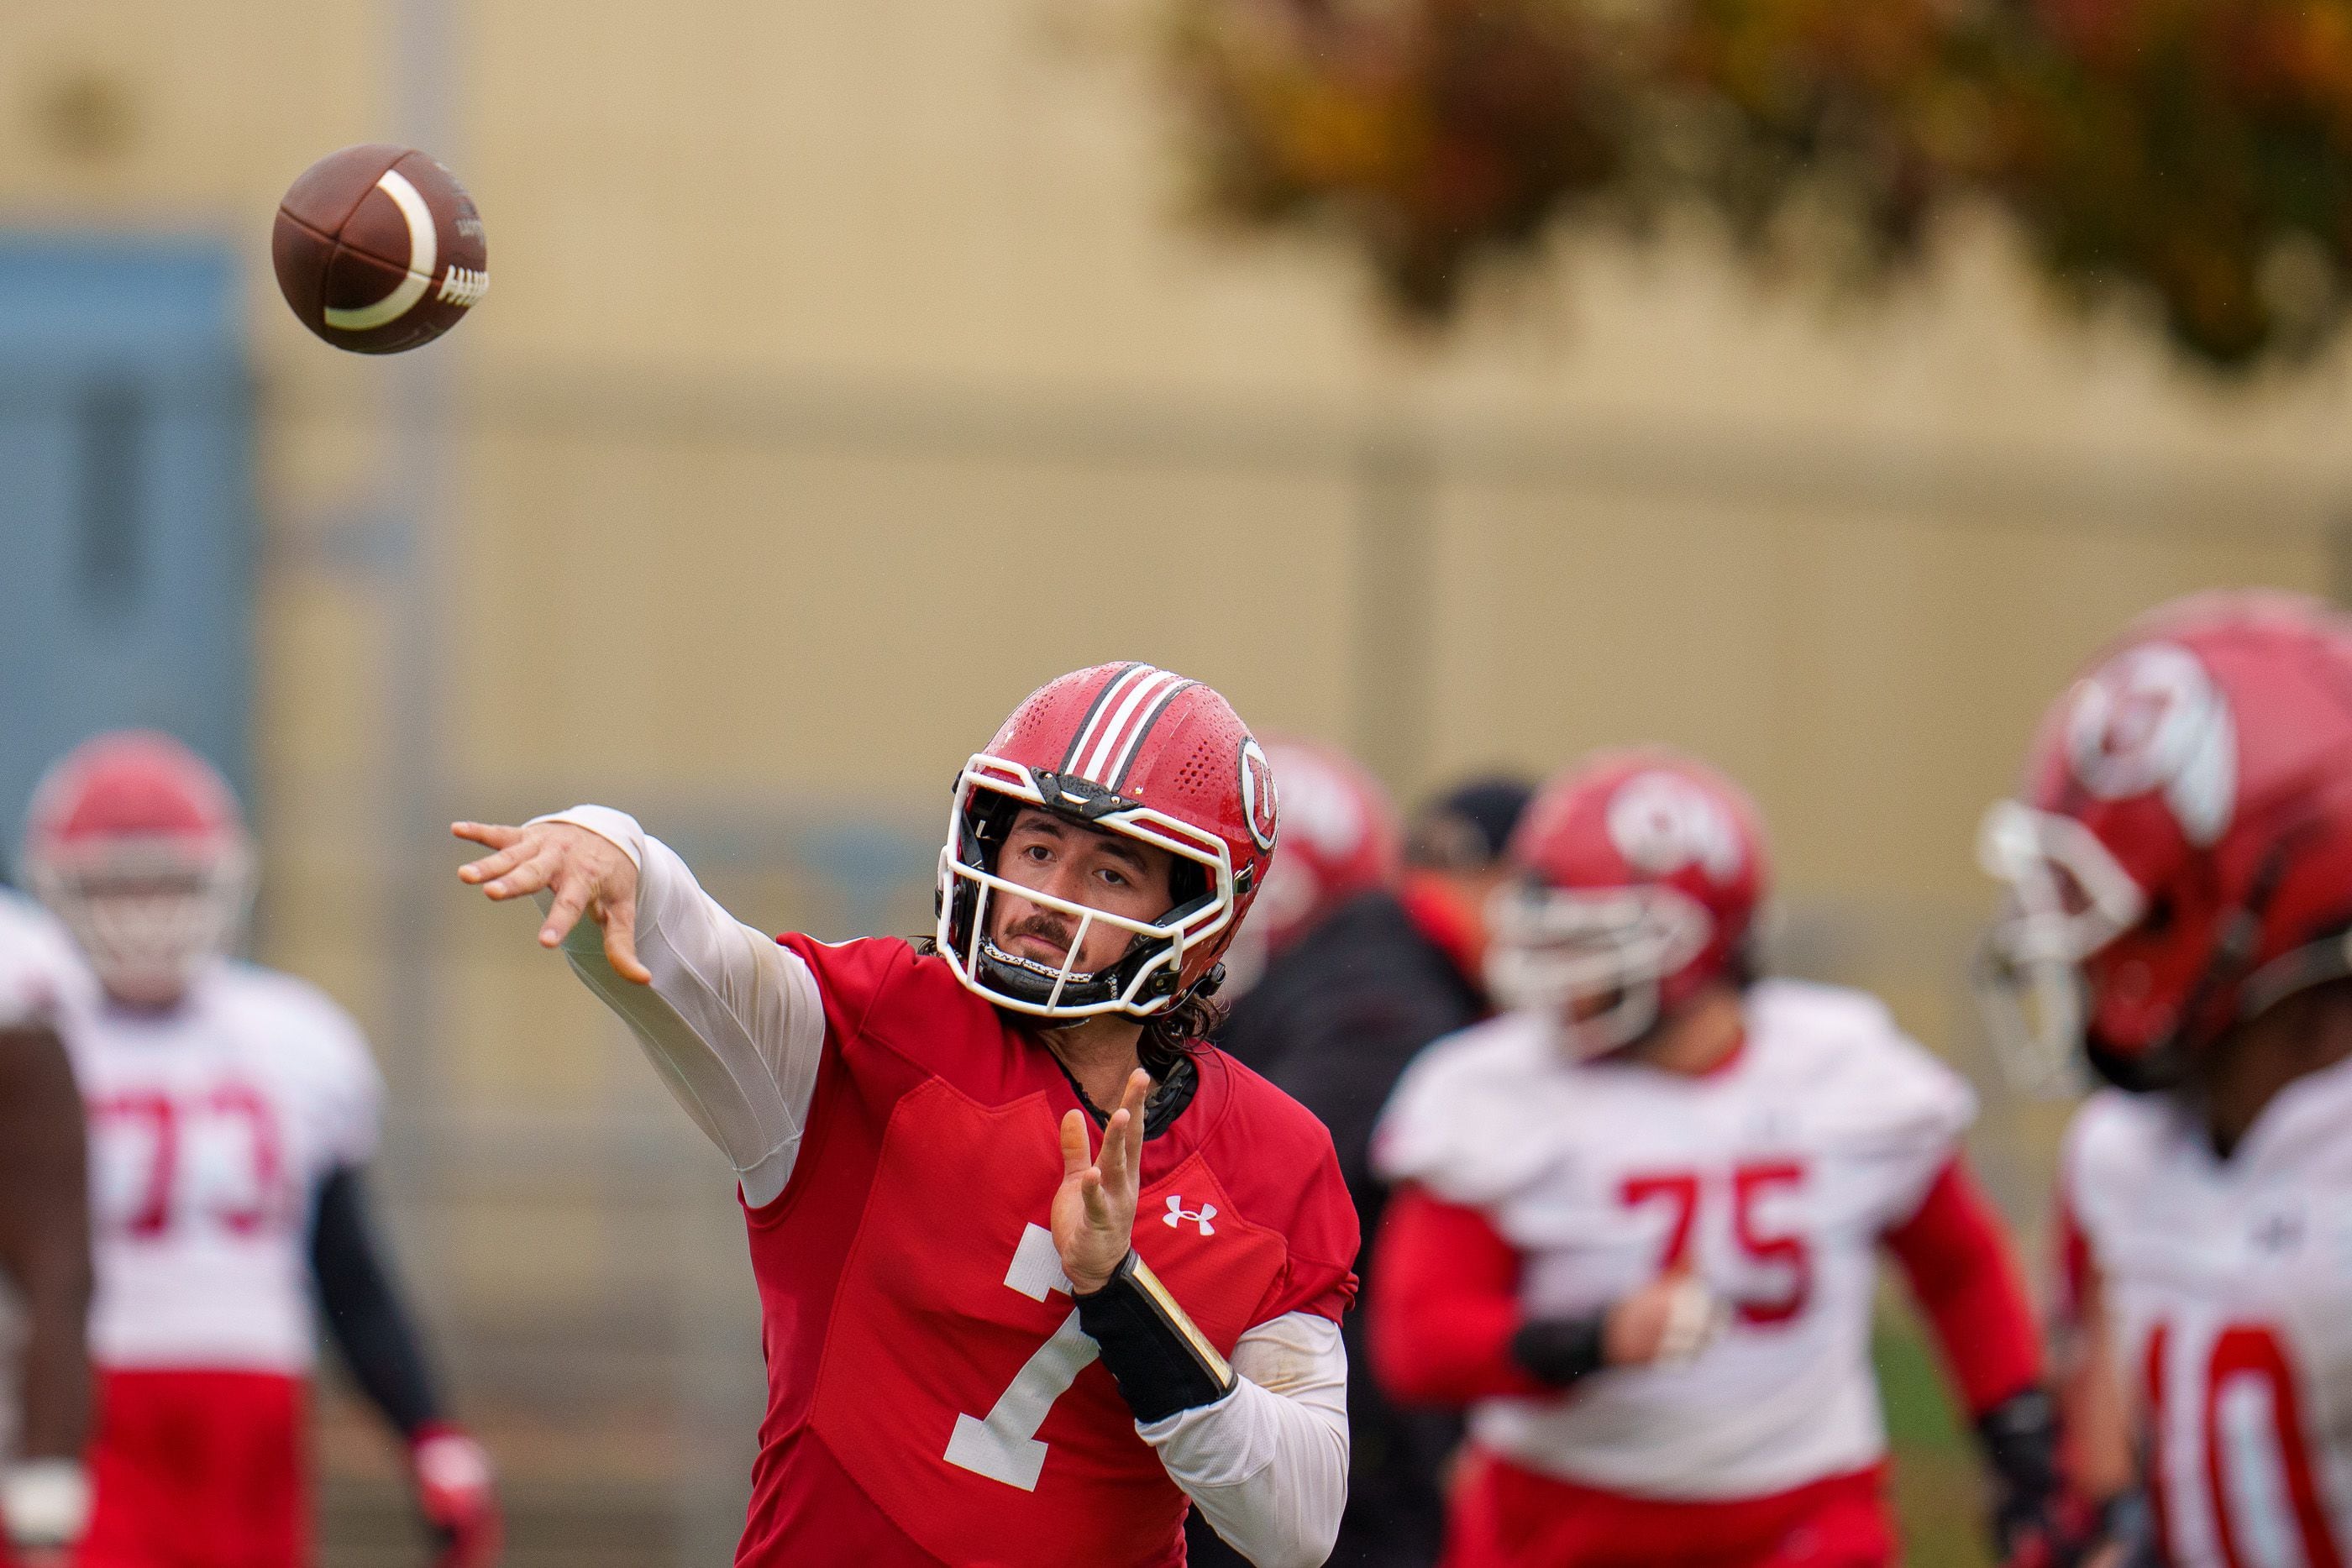 (Trent Nelson | The Salt Lake Tribune) Cameron Rising as the Utah Utes practice leading up to the Rose Bowl at Harbor College in Wilmington, Calif., on Wednesday, Dec. 29, 2021.